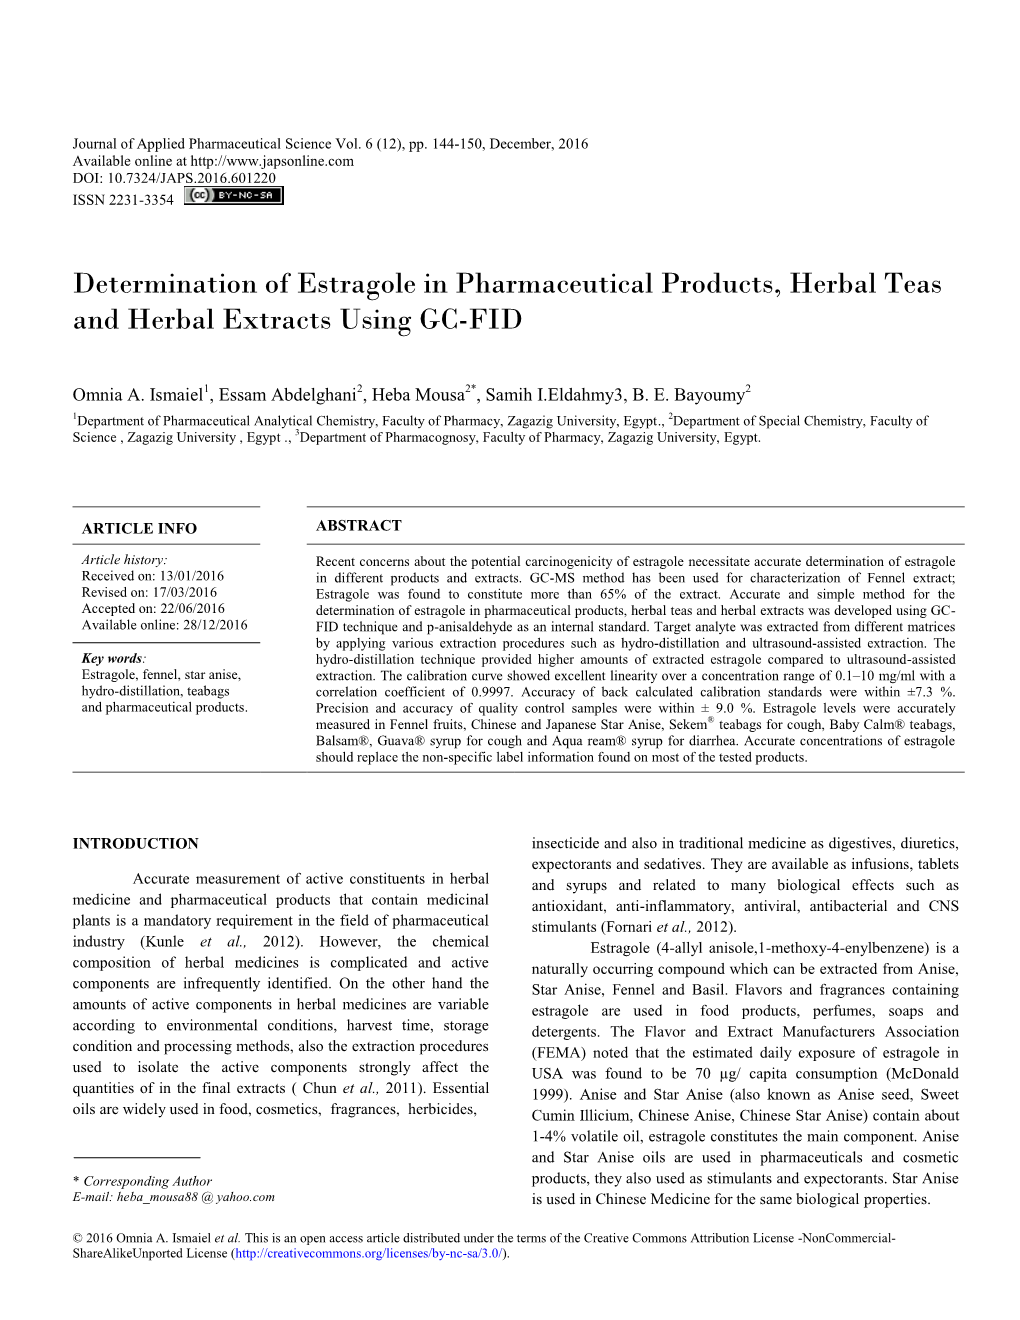 Determination of Estragole in Pharmaceutical Products, Herbal Teas and Herbal Extracts Using GC-FID